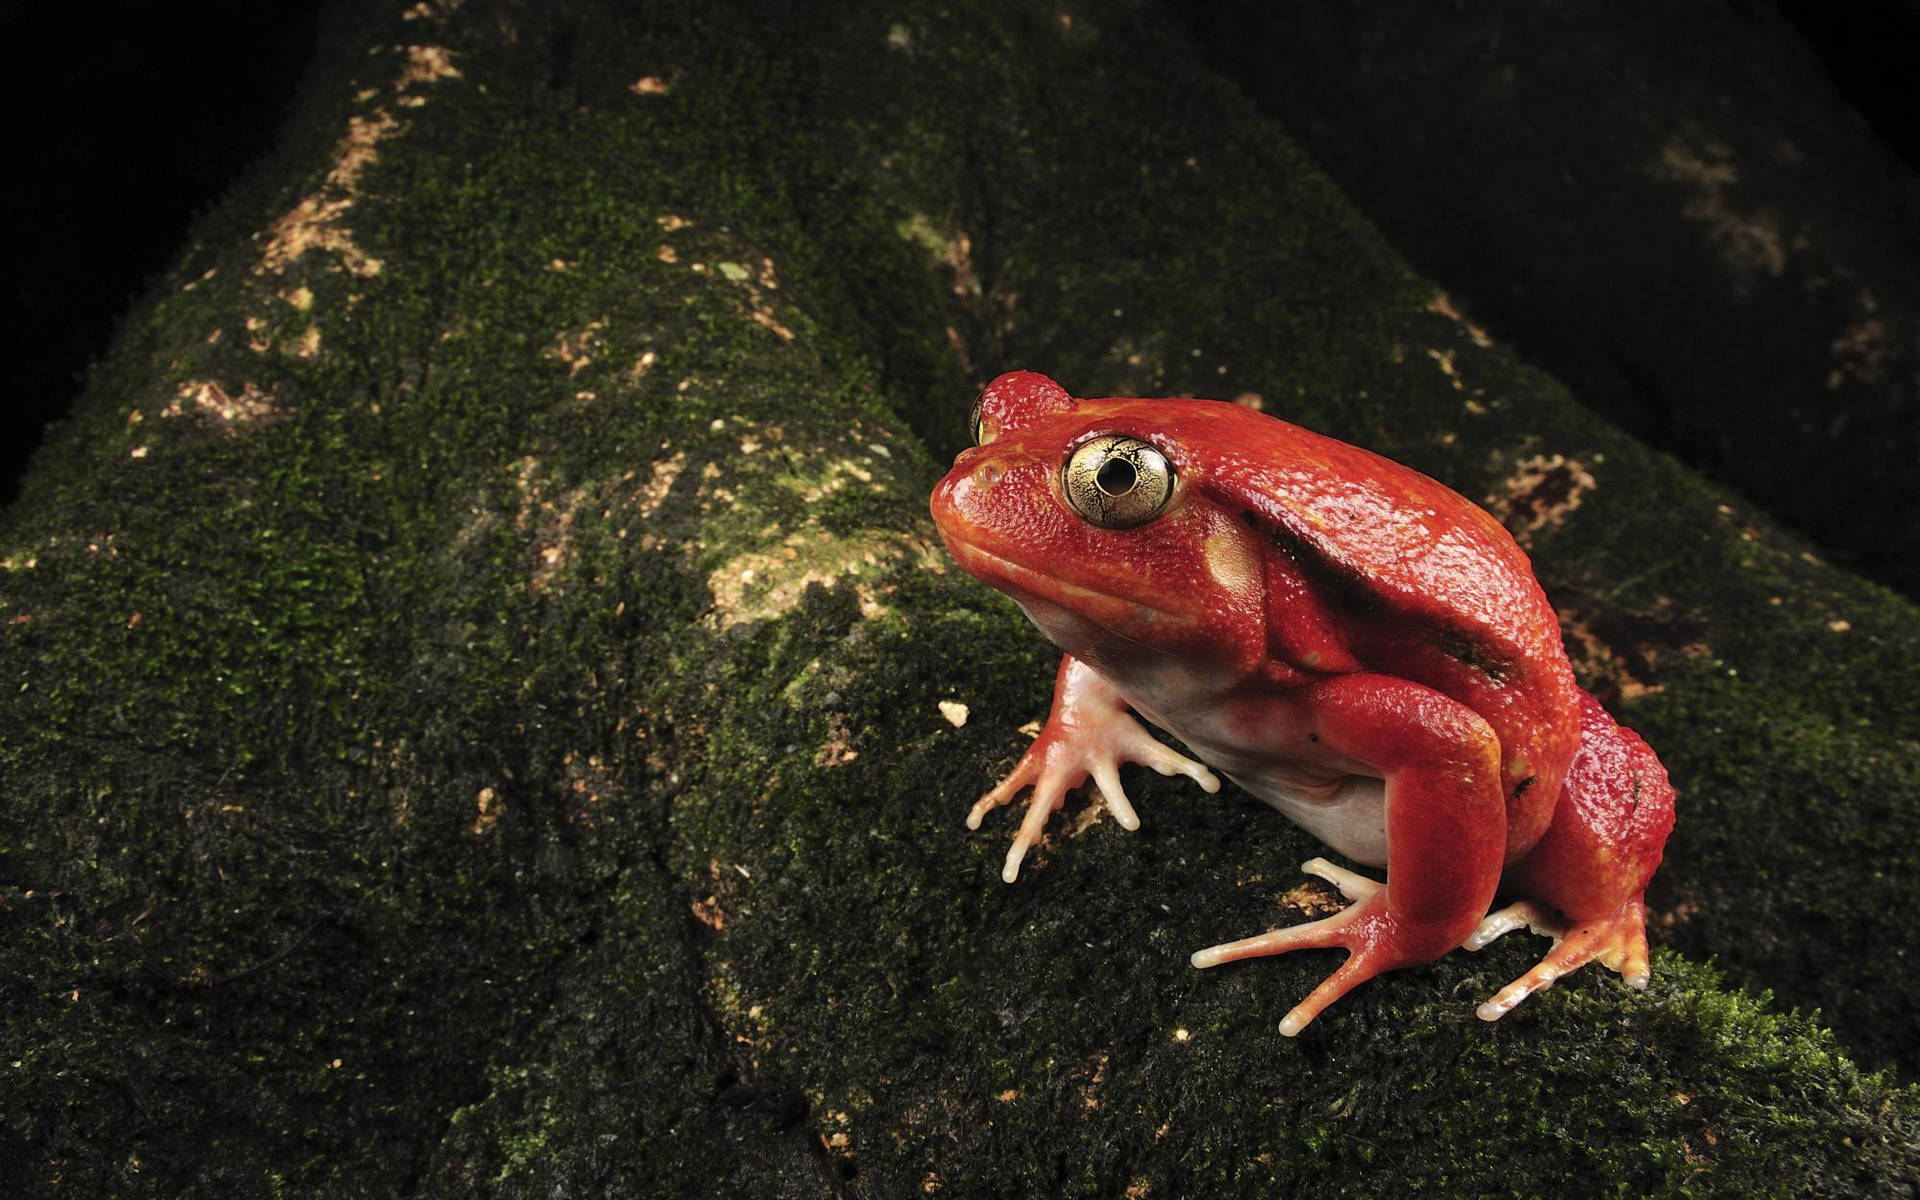 Download Cute Frog With Red Skin Wallpaper 